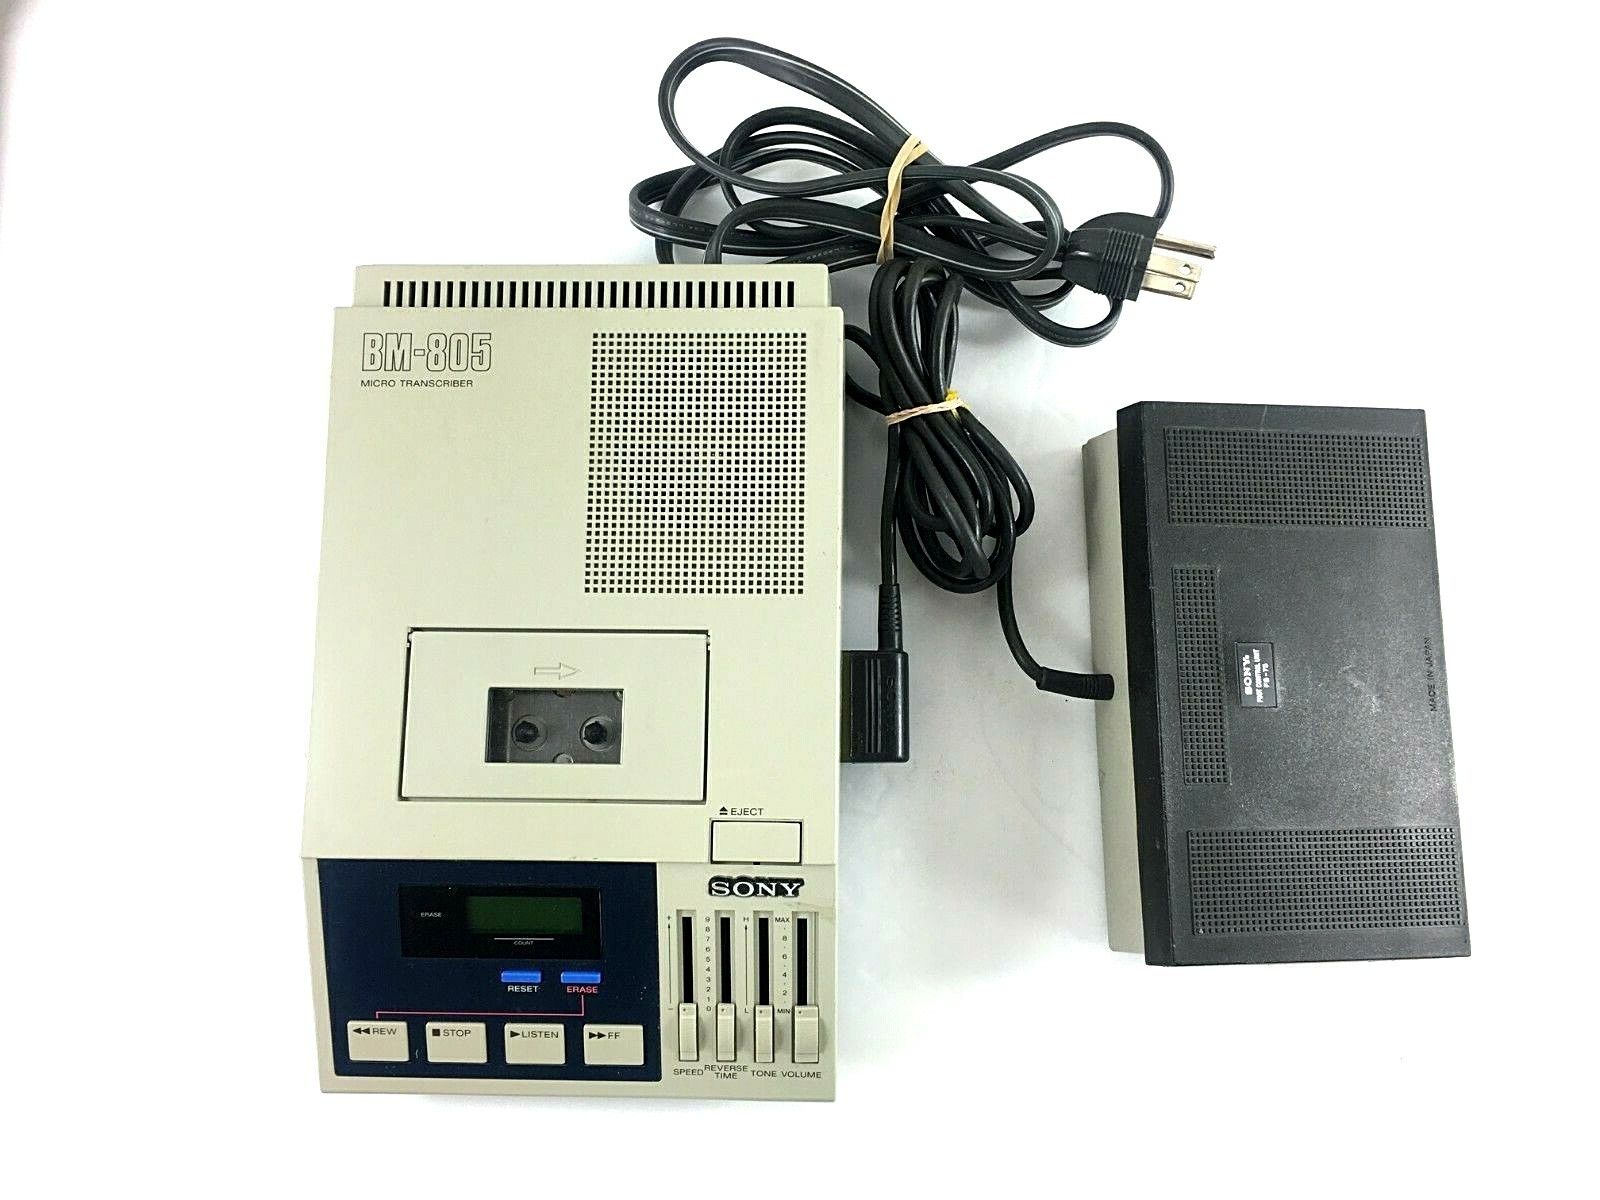 Sony BM805 Max 73% OFF Microcassette Transcriber with Foot Pedal - w Vintage 5 ☆ very popular